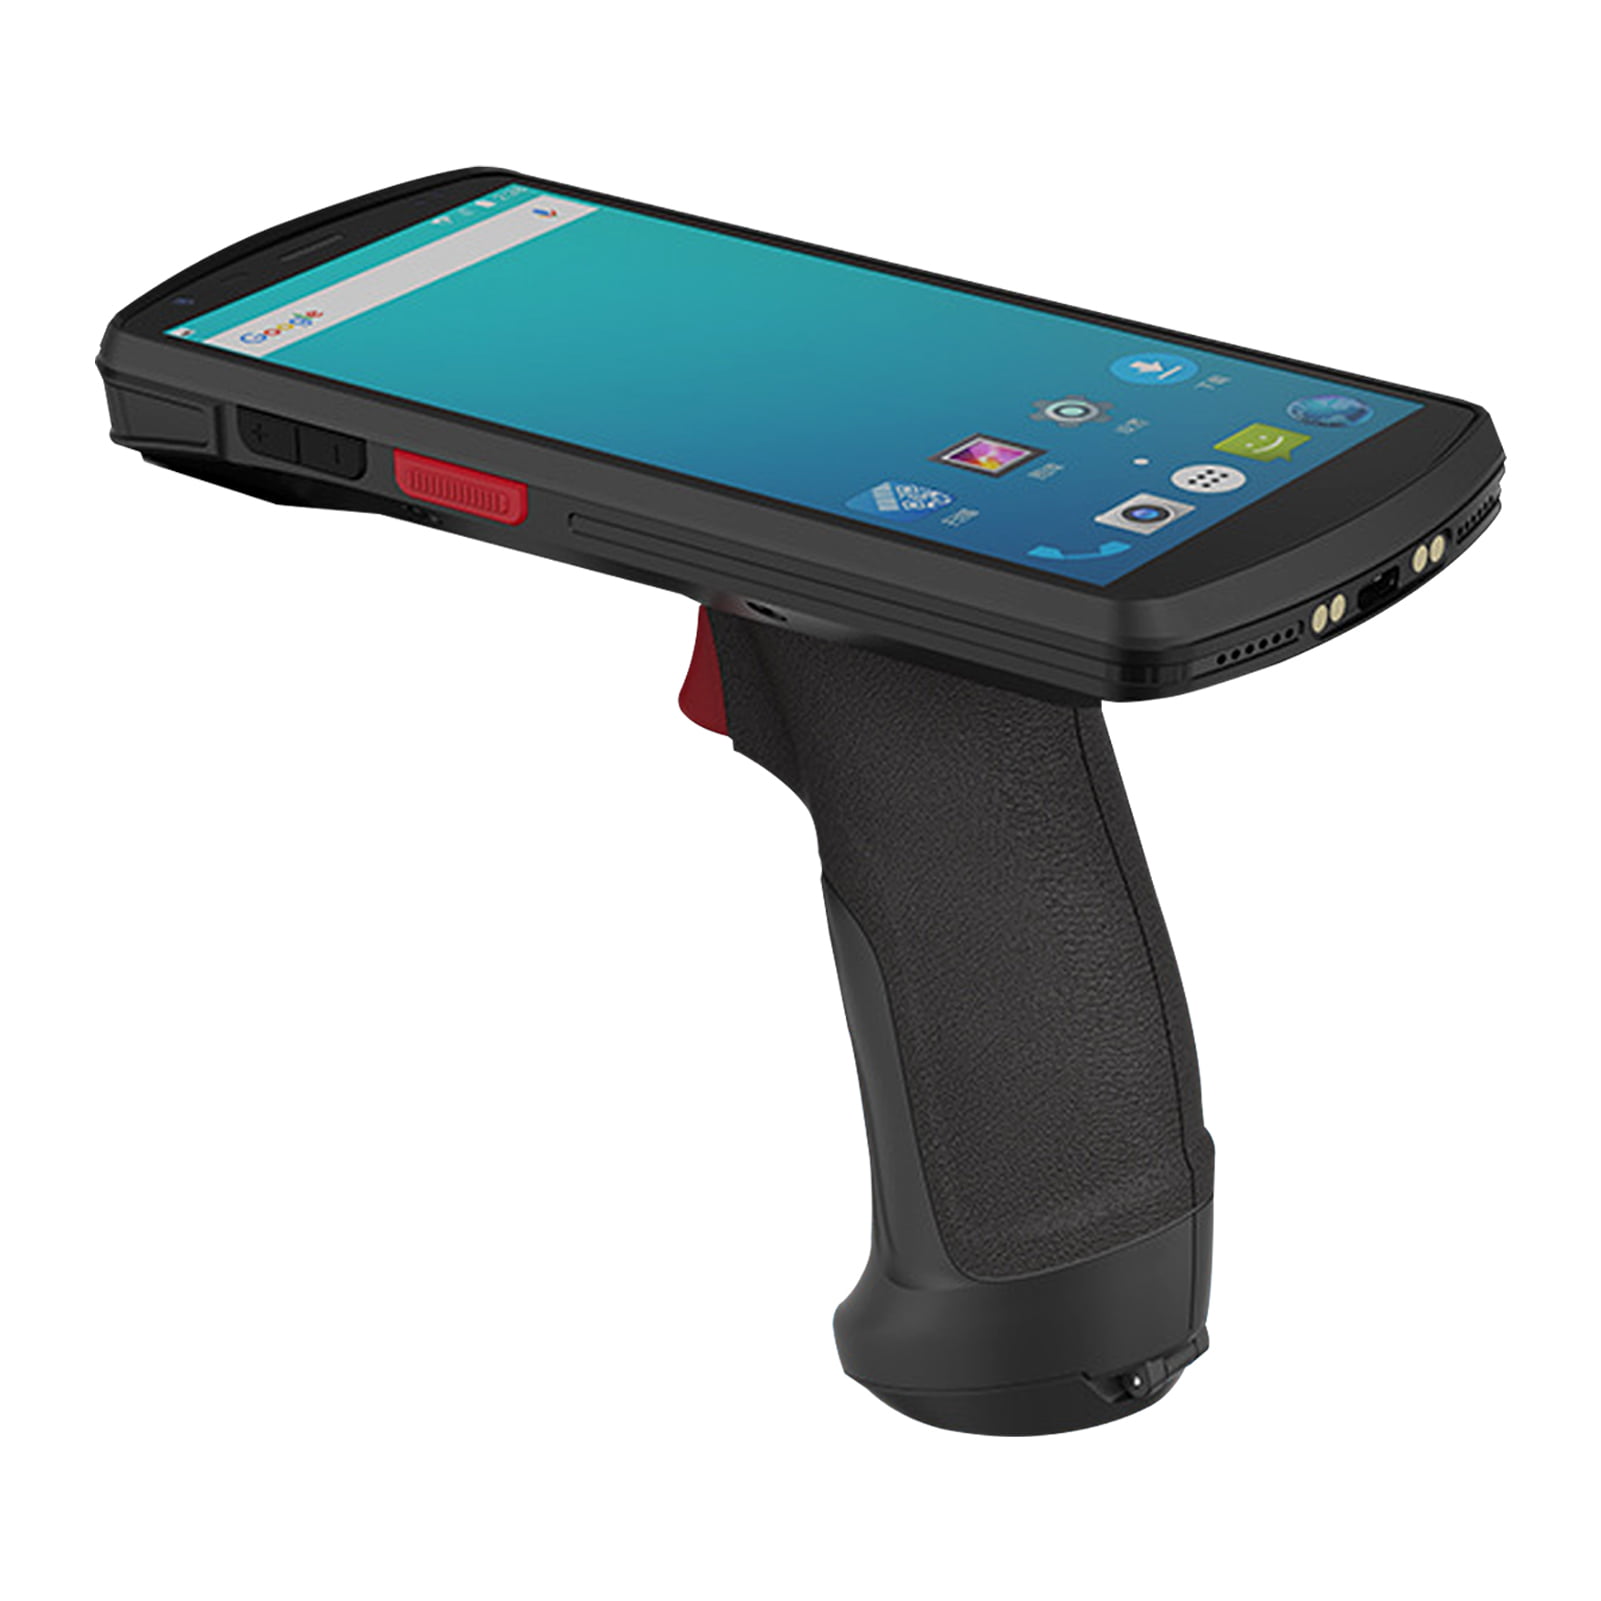 Voupuoda Barcode Scanner an-Droid PDA Handheld POS Terminal Inventory Machine 1D/2D/QR Scanner 3G WiFi BT Mobile Computer with 3.5 Inch Touchscreen NFC Function for Warehouse Inventory Logistics 